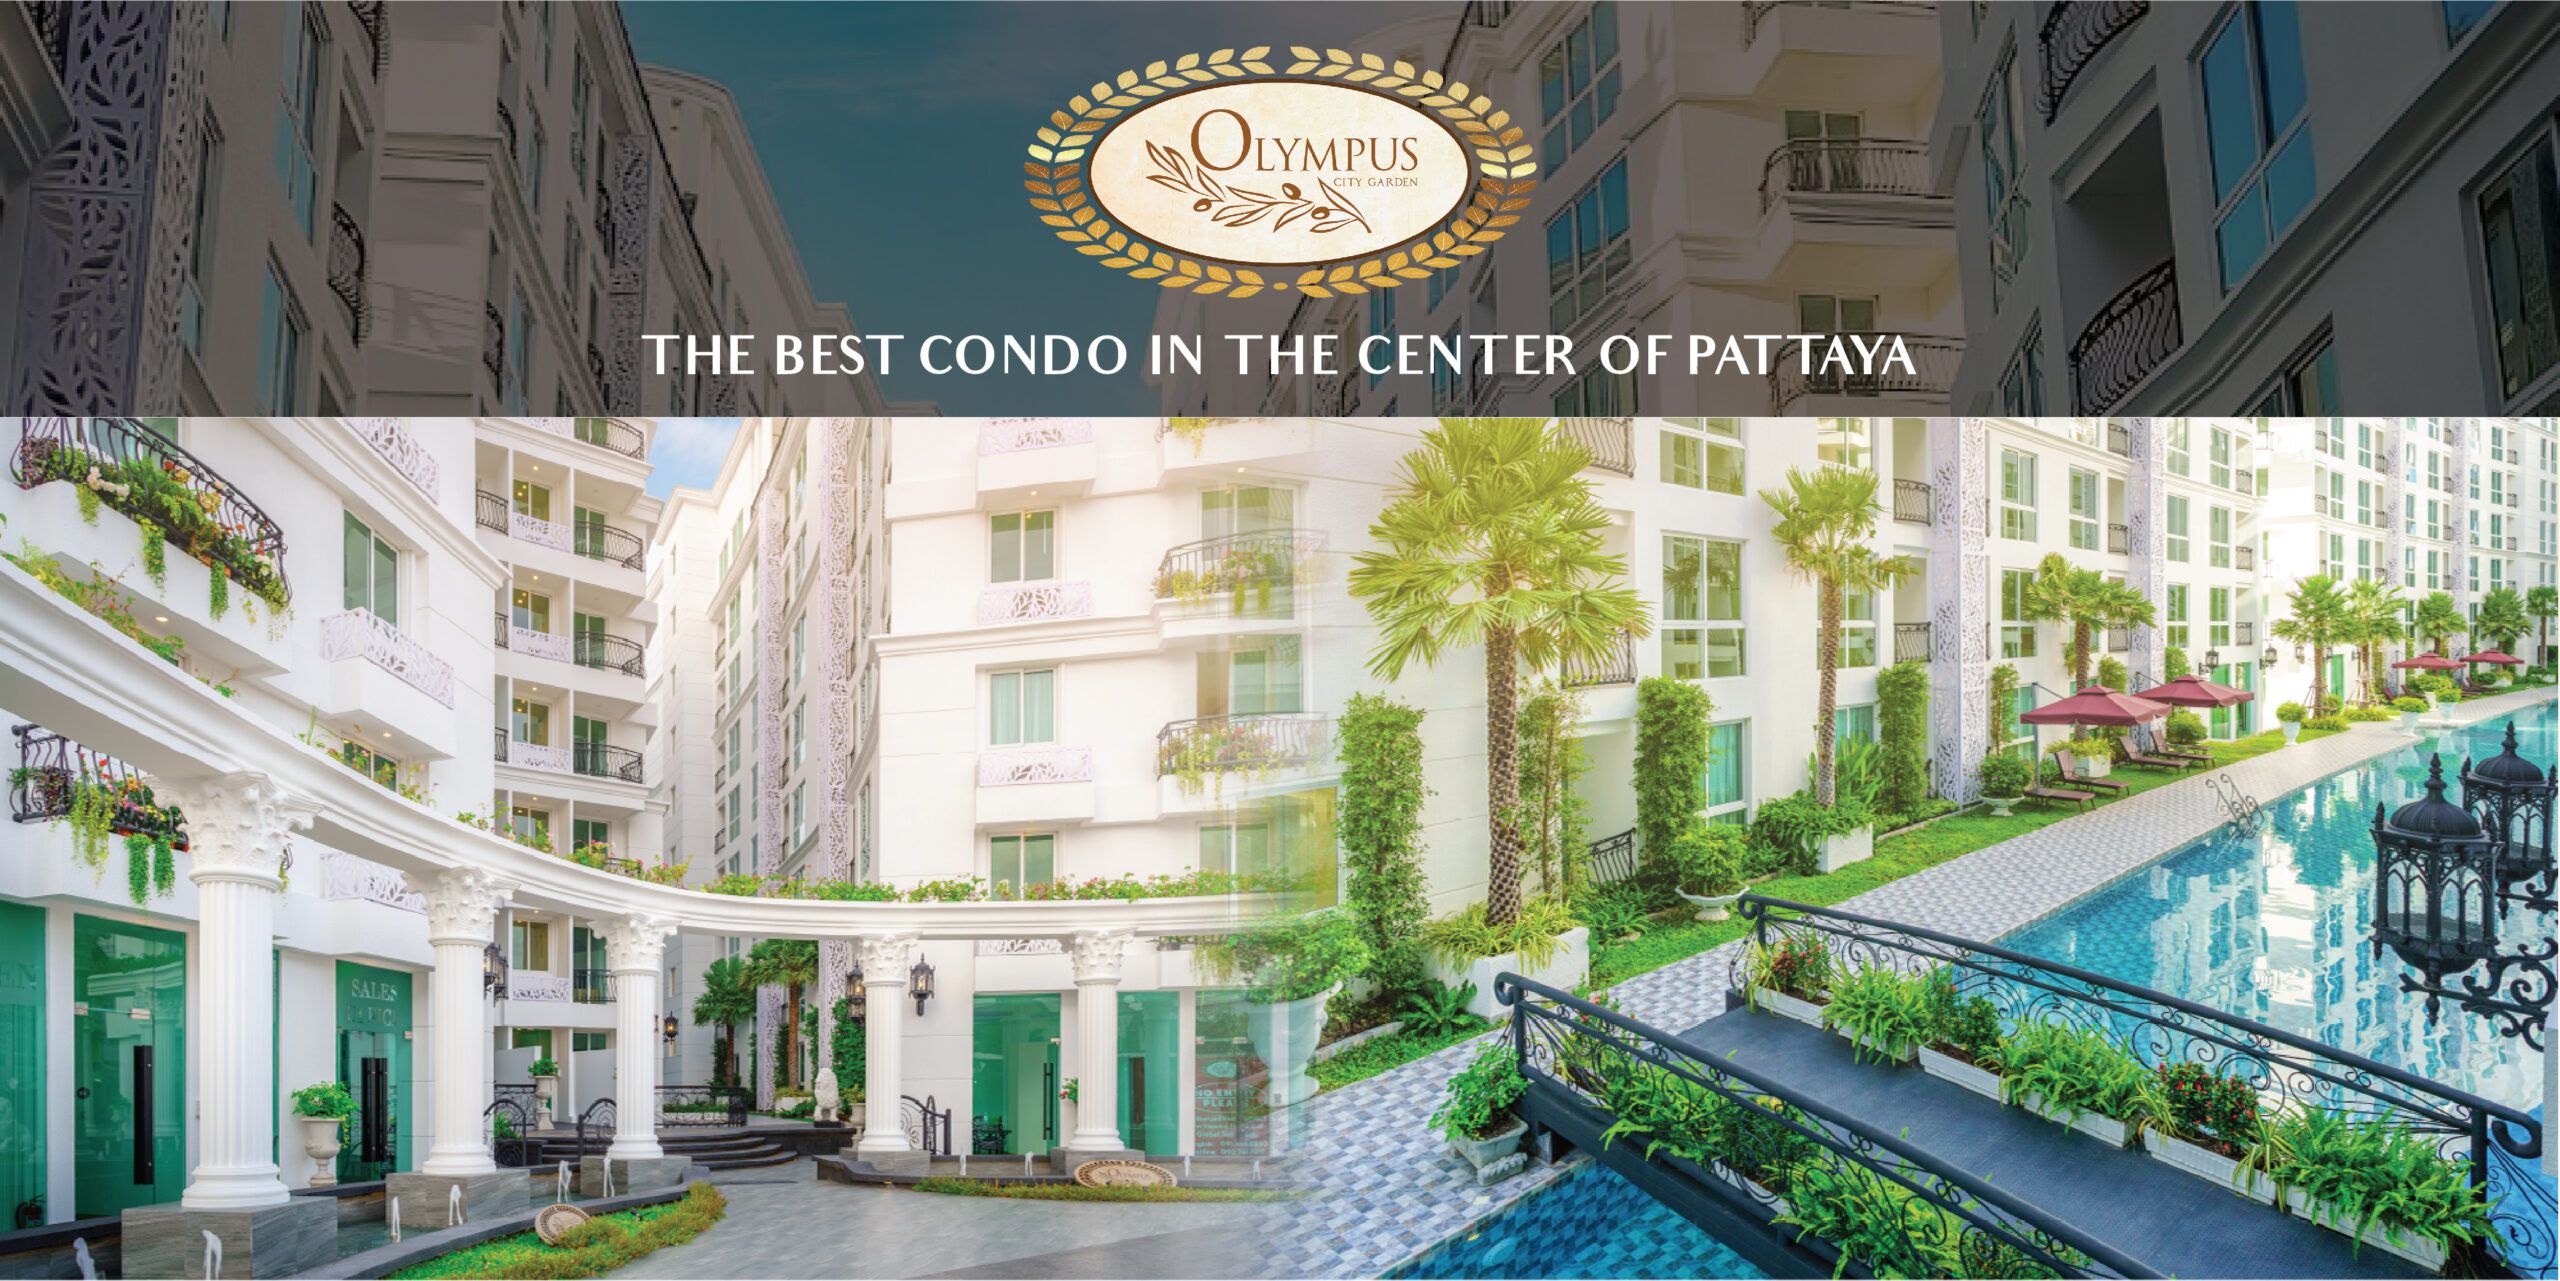 THE BEST CONDO IN THE CENTER OF PATTAYA-01